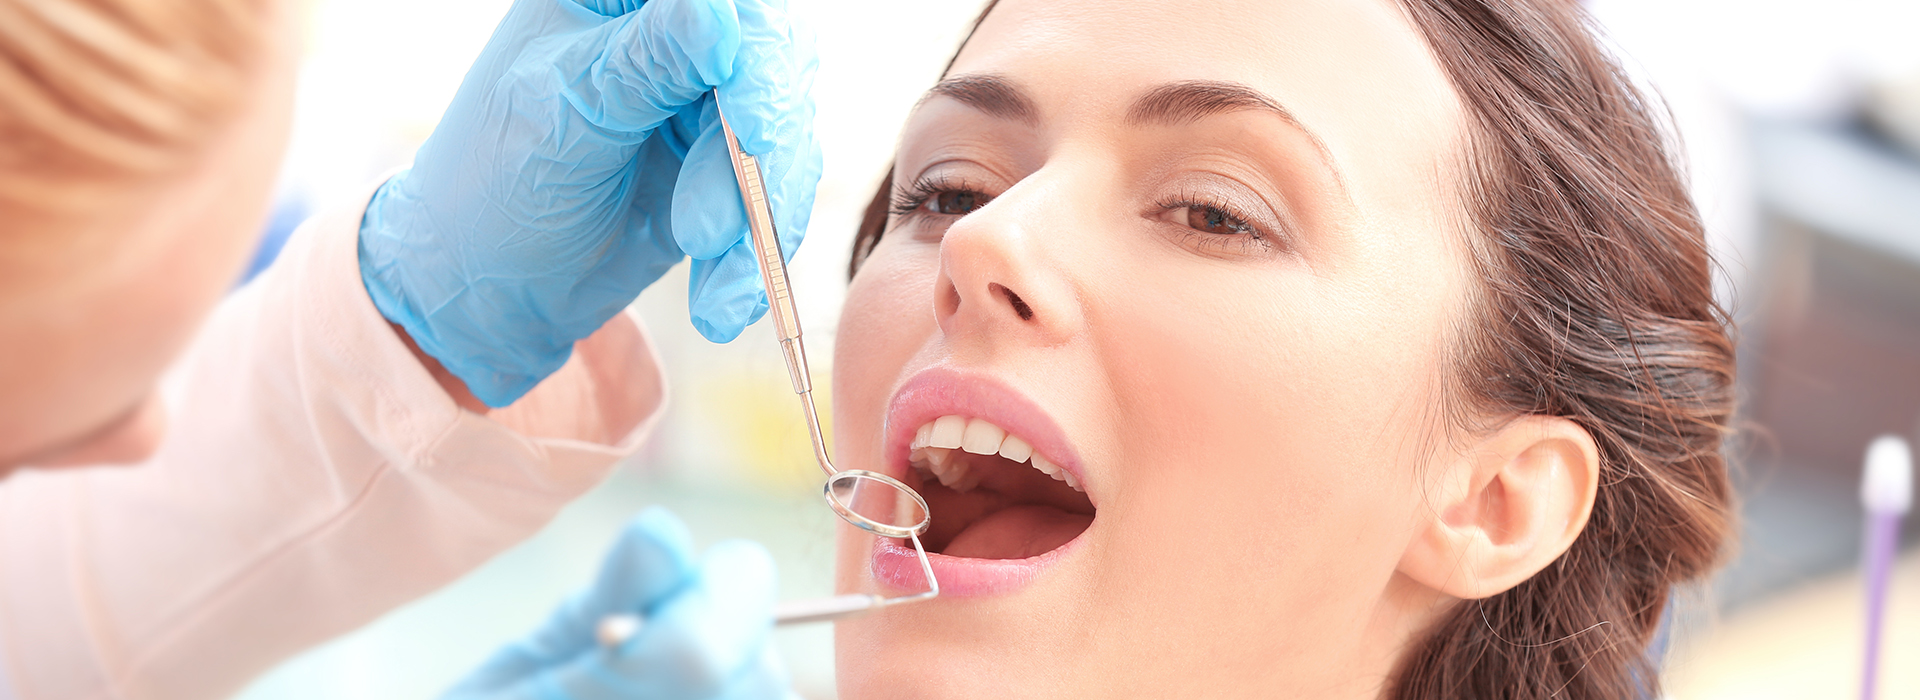 A woman receiving dental care, with a dental hygienist performing a procedure on her teeth.